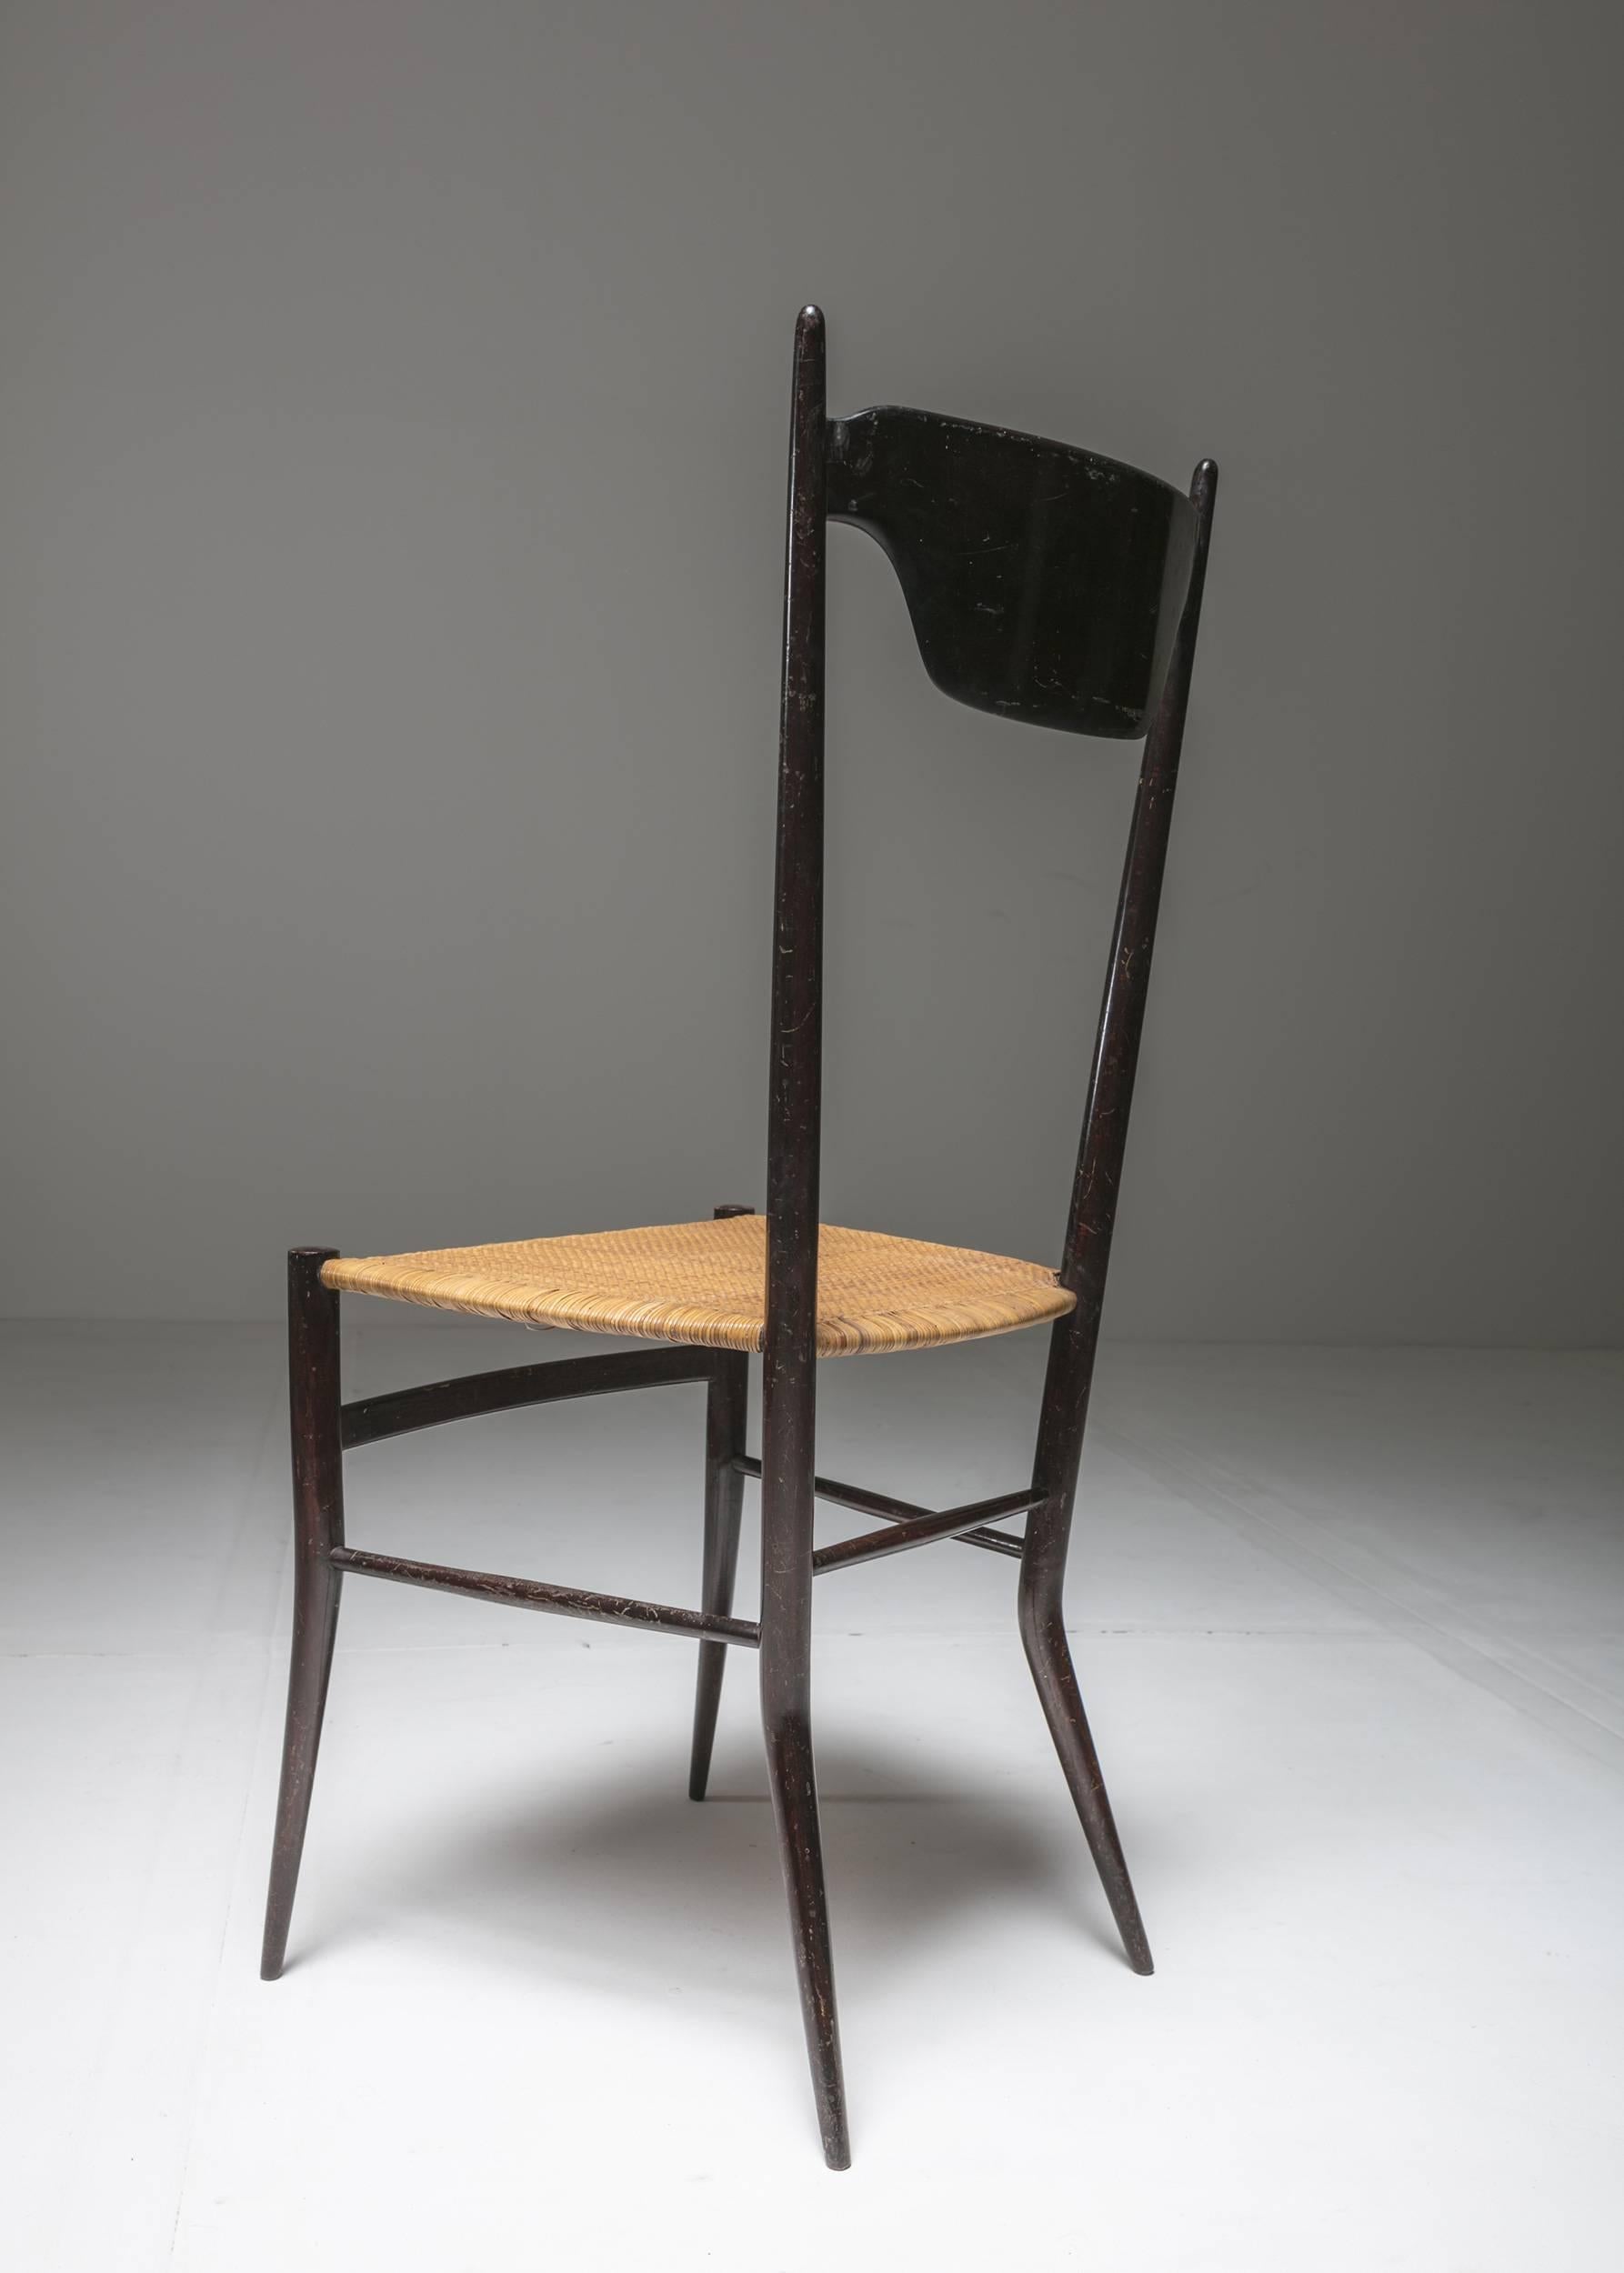 High back Chiavari chair by Sanguineti for Colombo.
Sculptural example of early 1950s, Chiavari production with lean wood frame and wicker covering.